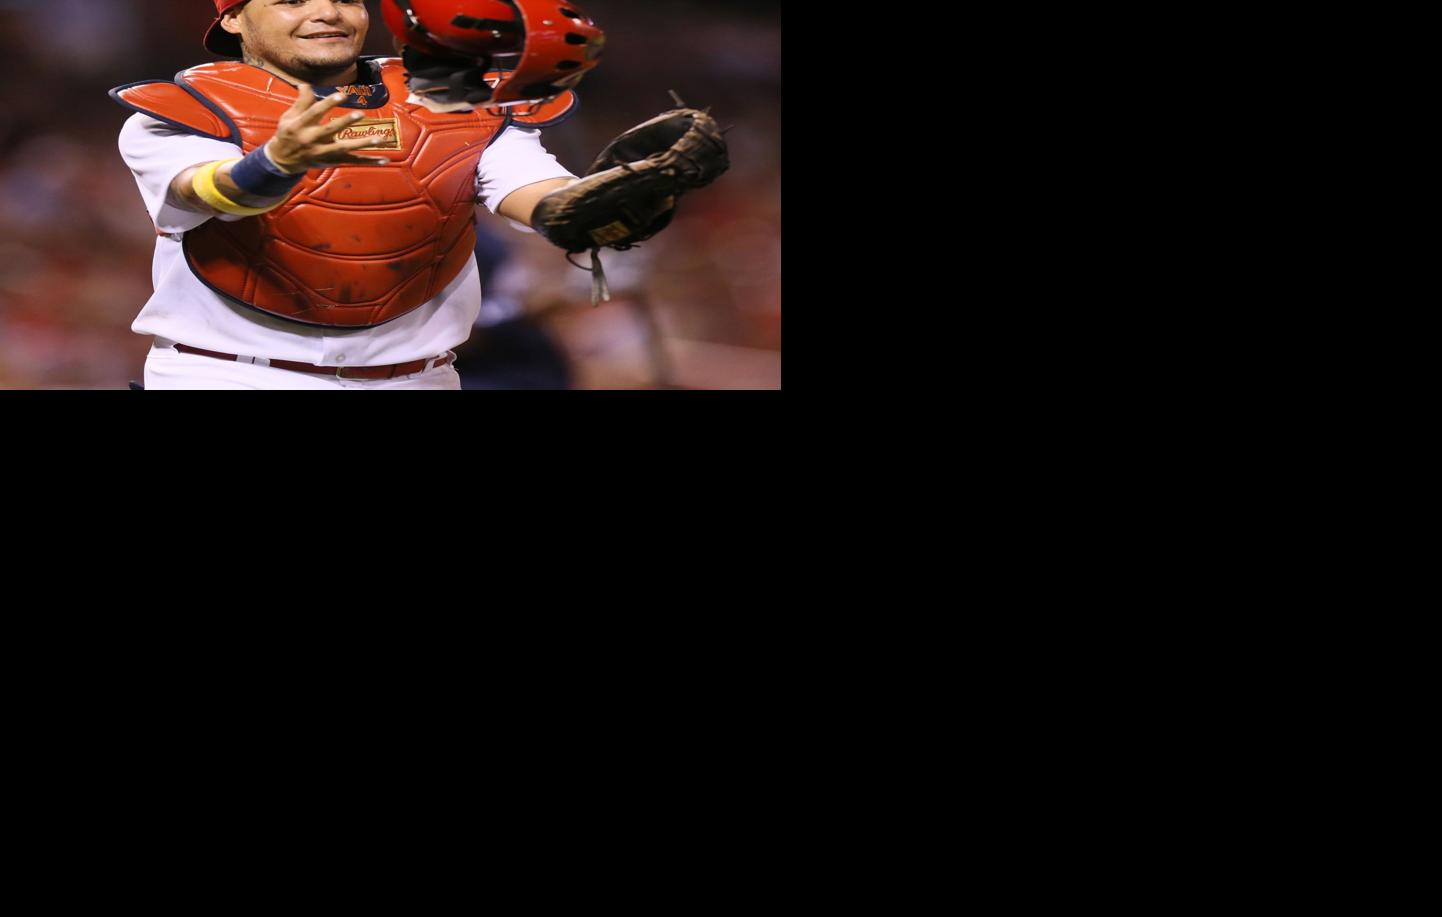 Cardinals catcher gets ball stick to chest protector